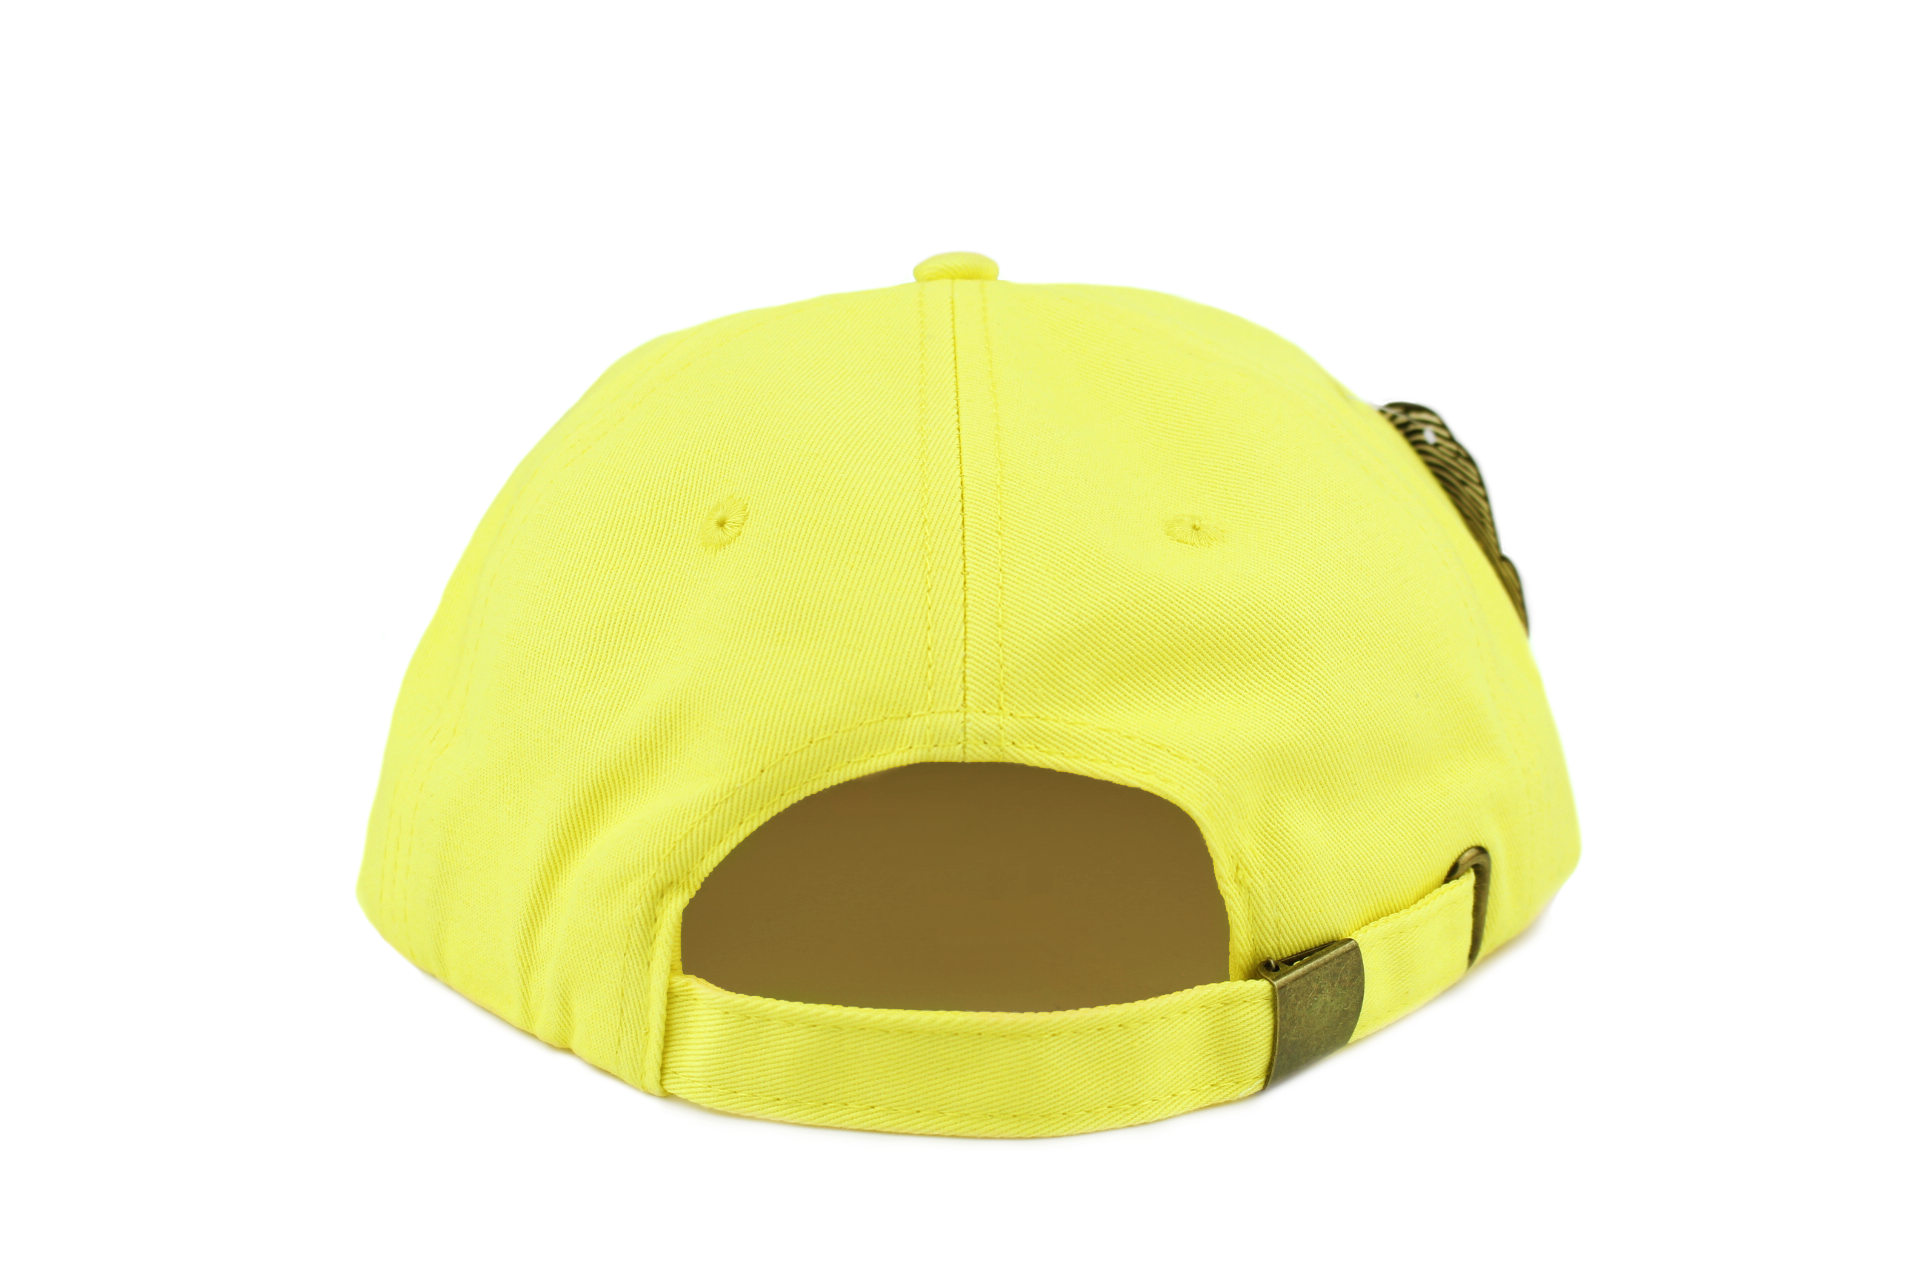 The Easy - 100% Cotton - Bright Yellow - Wholesale